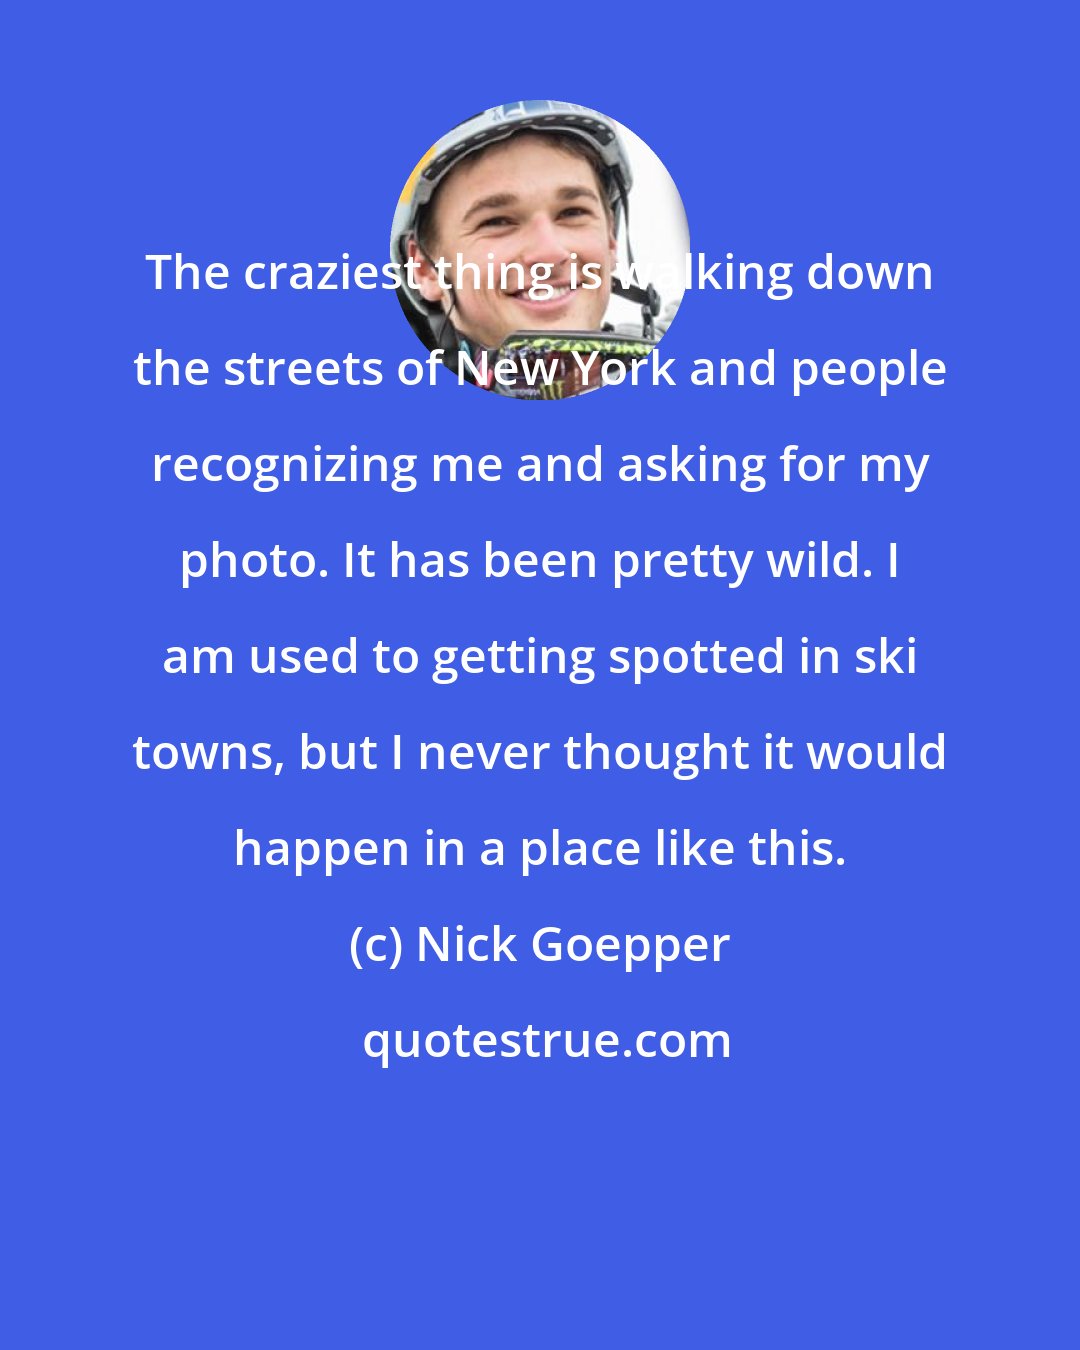 Nick Goepper: The craziest thing is walking down the streets of New York and people recognizing me and asking for my photo. It has been pretty wild. I am used to getting spotted in ski towns, but I never thought it would happen in a place like this.